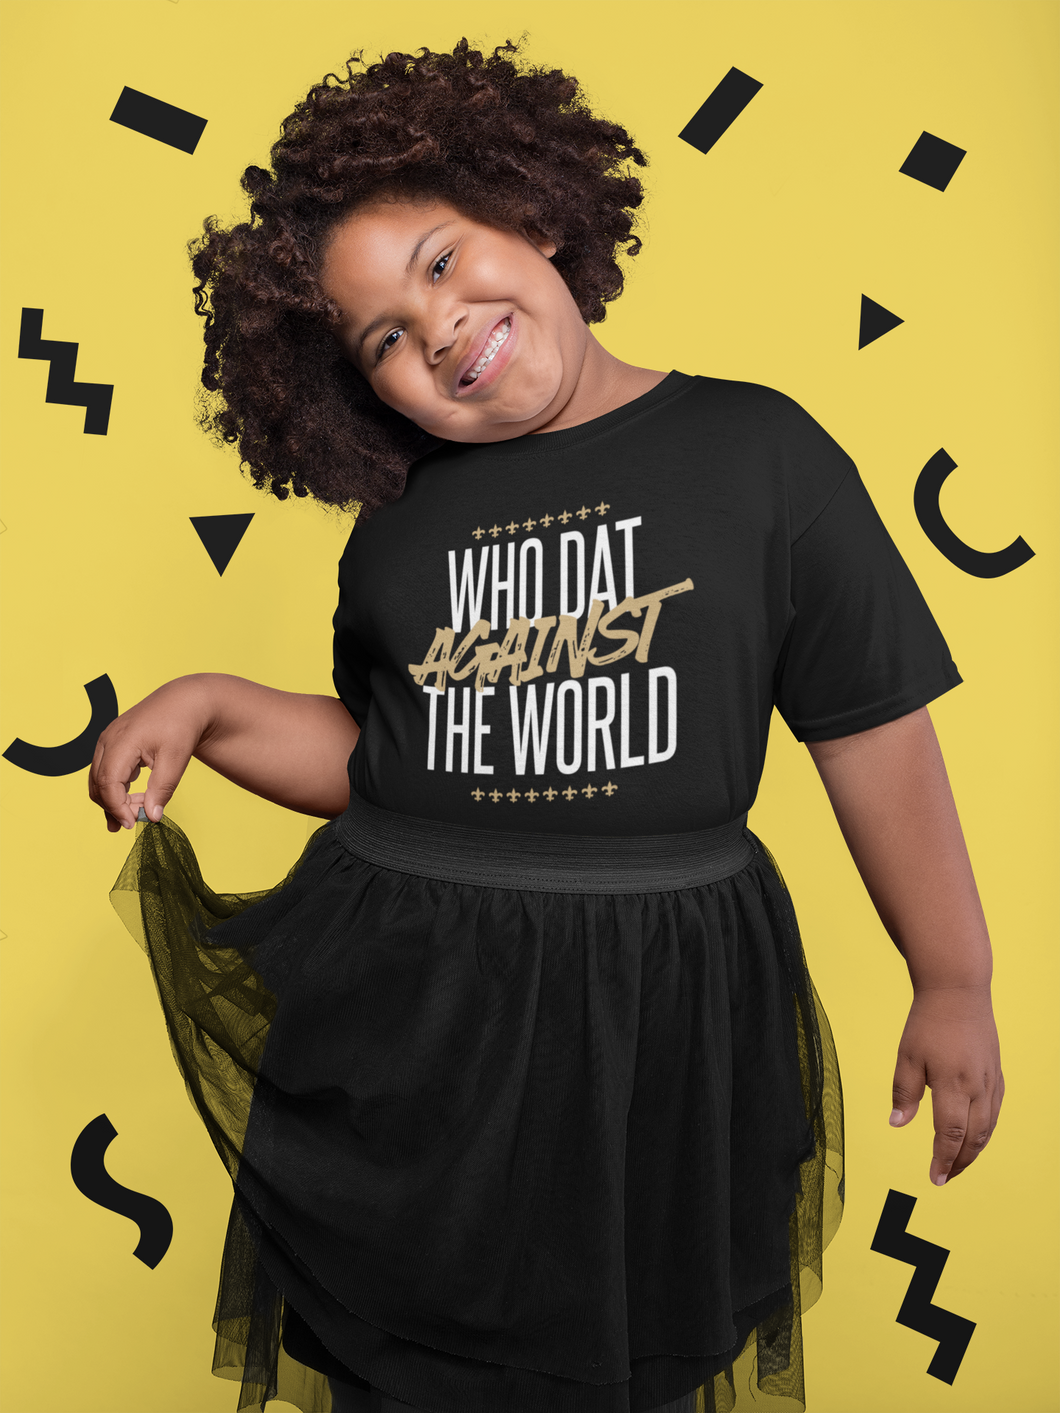 WhoDat against the Wrld Kids Tee